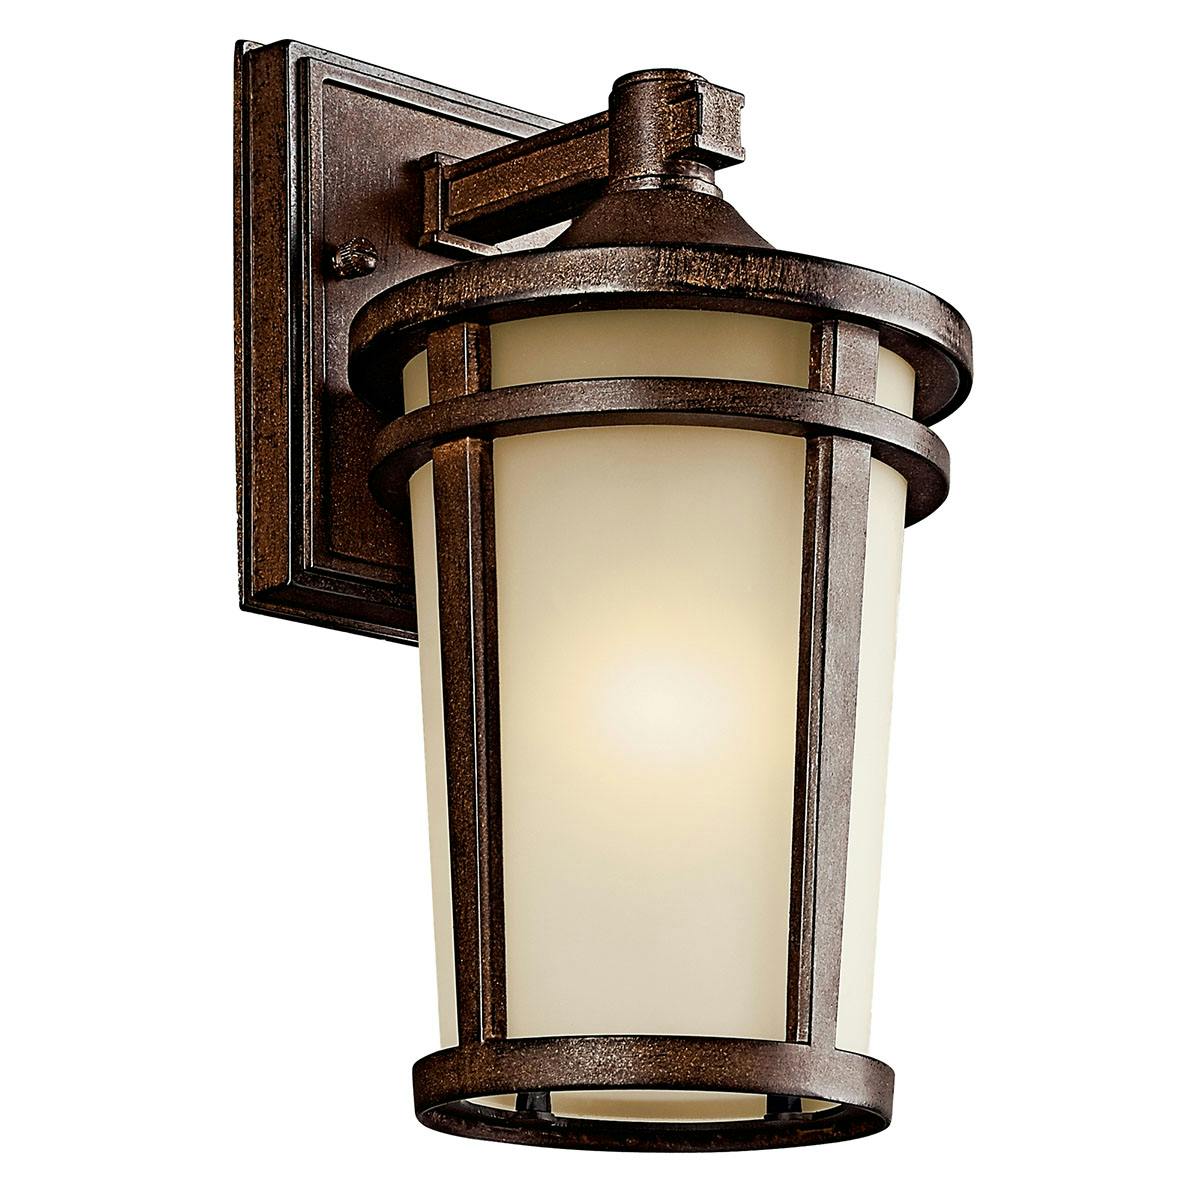 The Atwood 11" Wall Light in Brown Stone on a white background